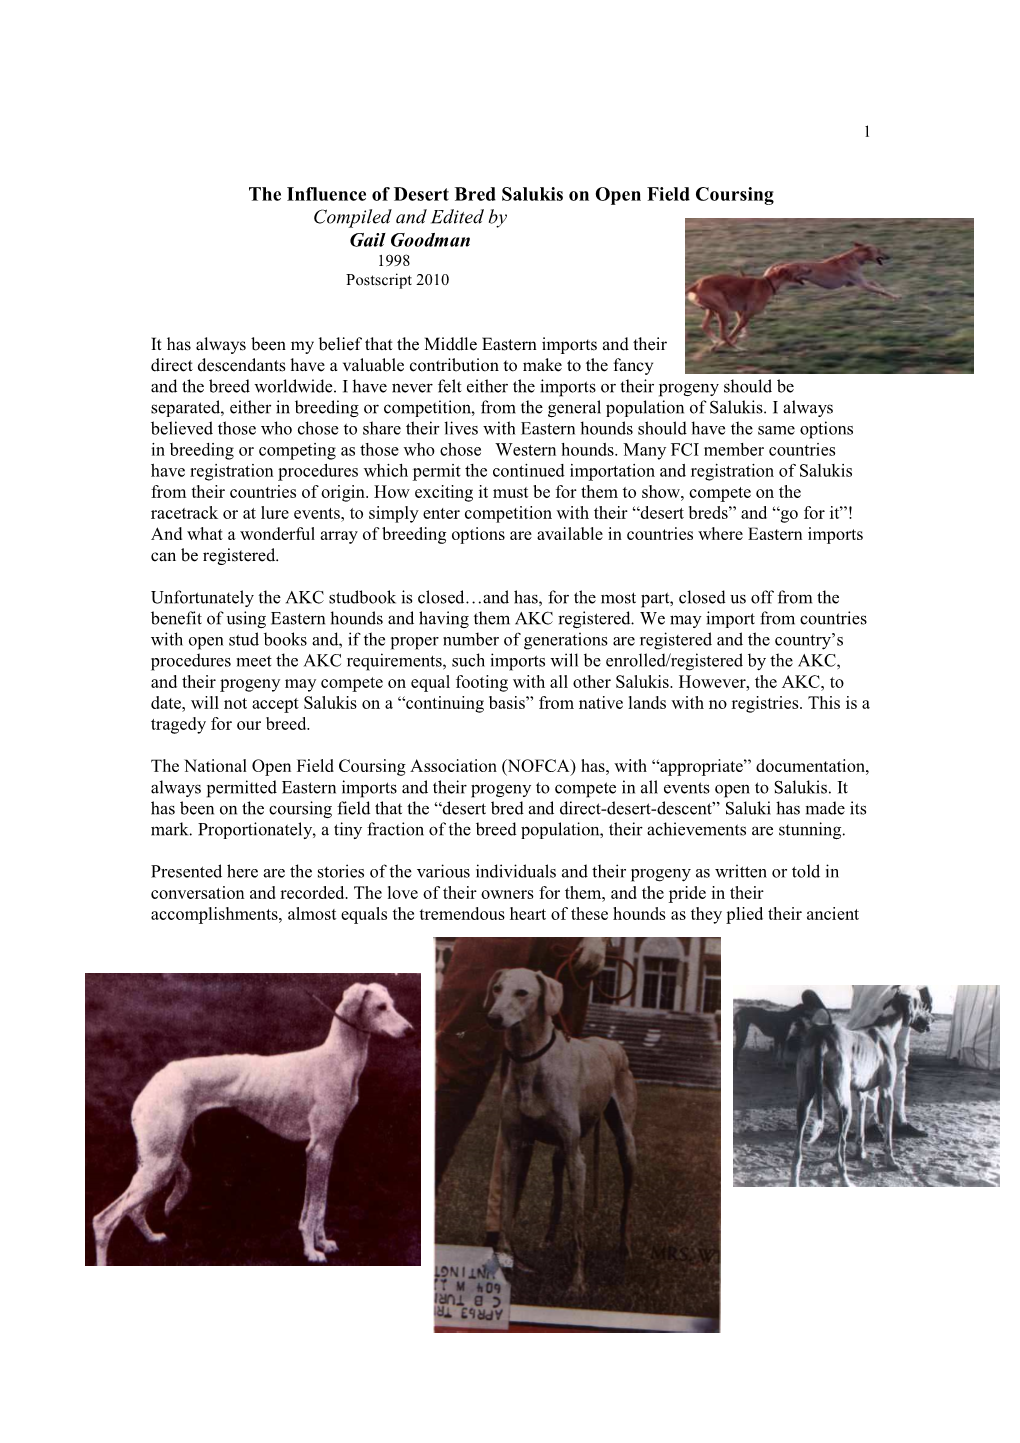 Influence of Desert Bred Salukis in USA Open Field Coursing 2